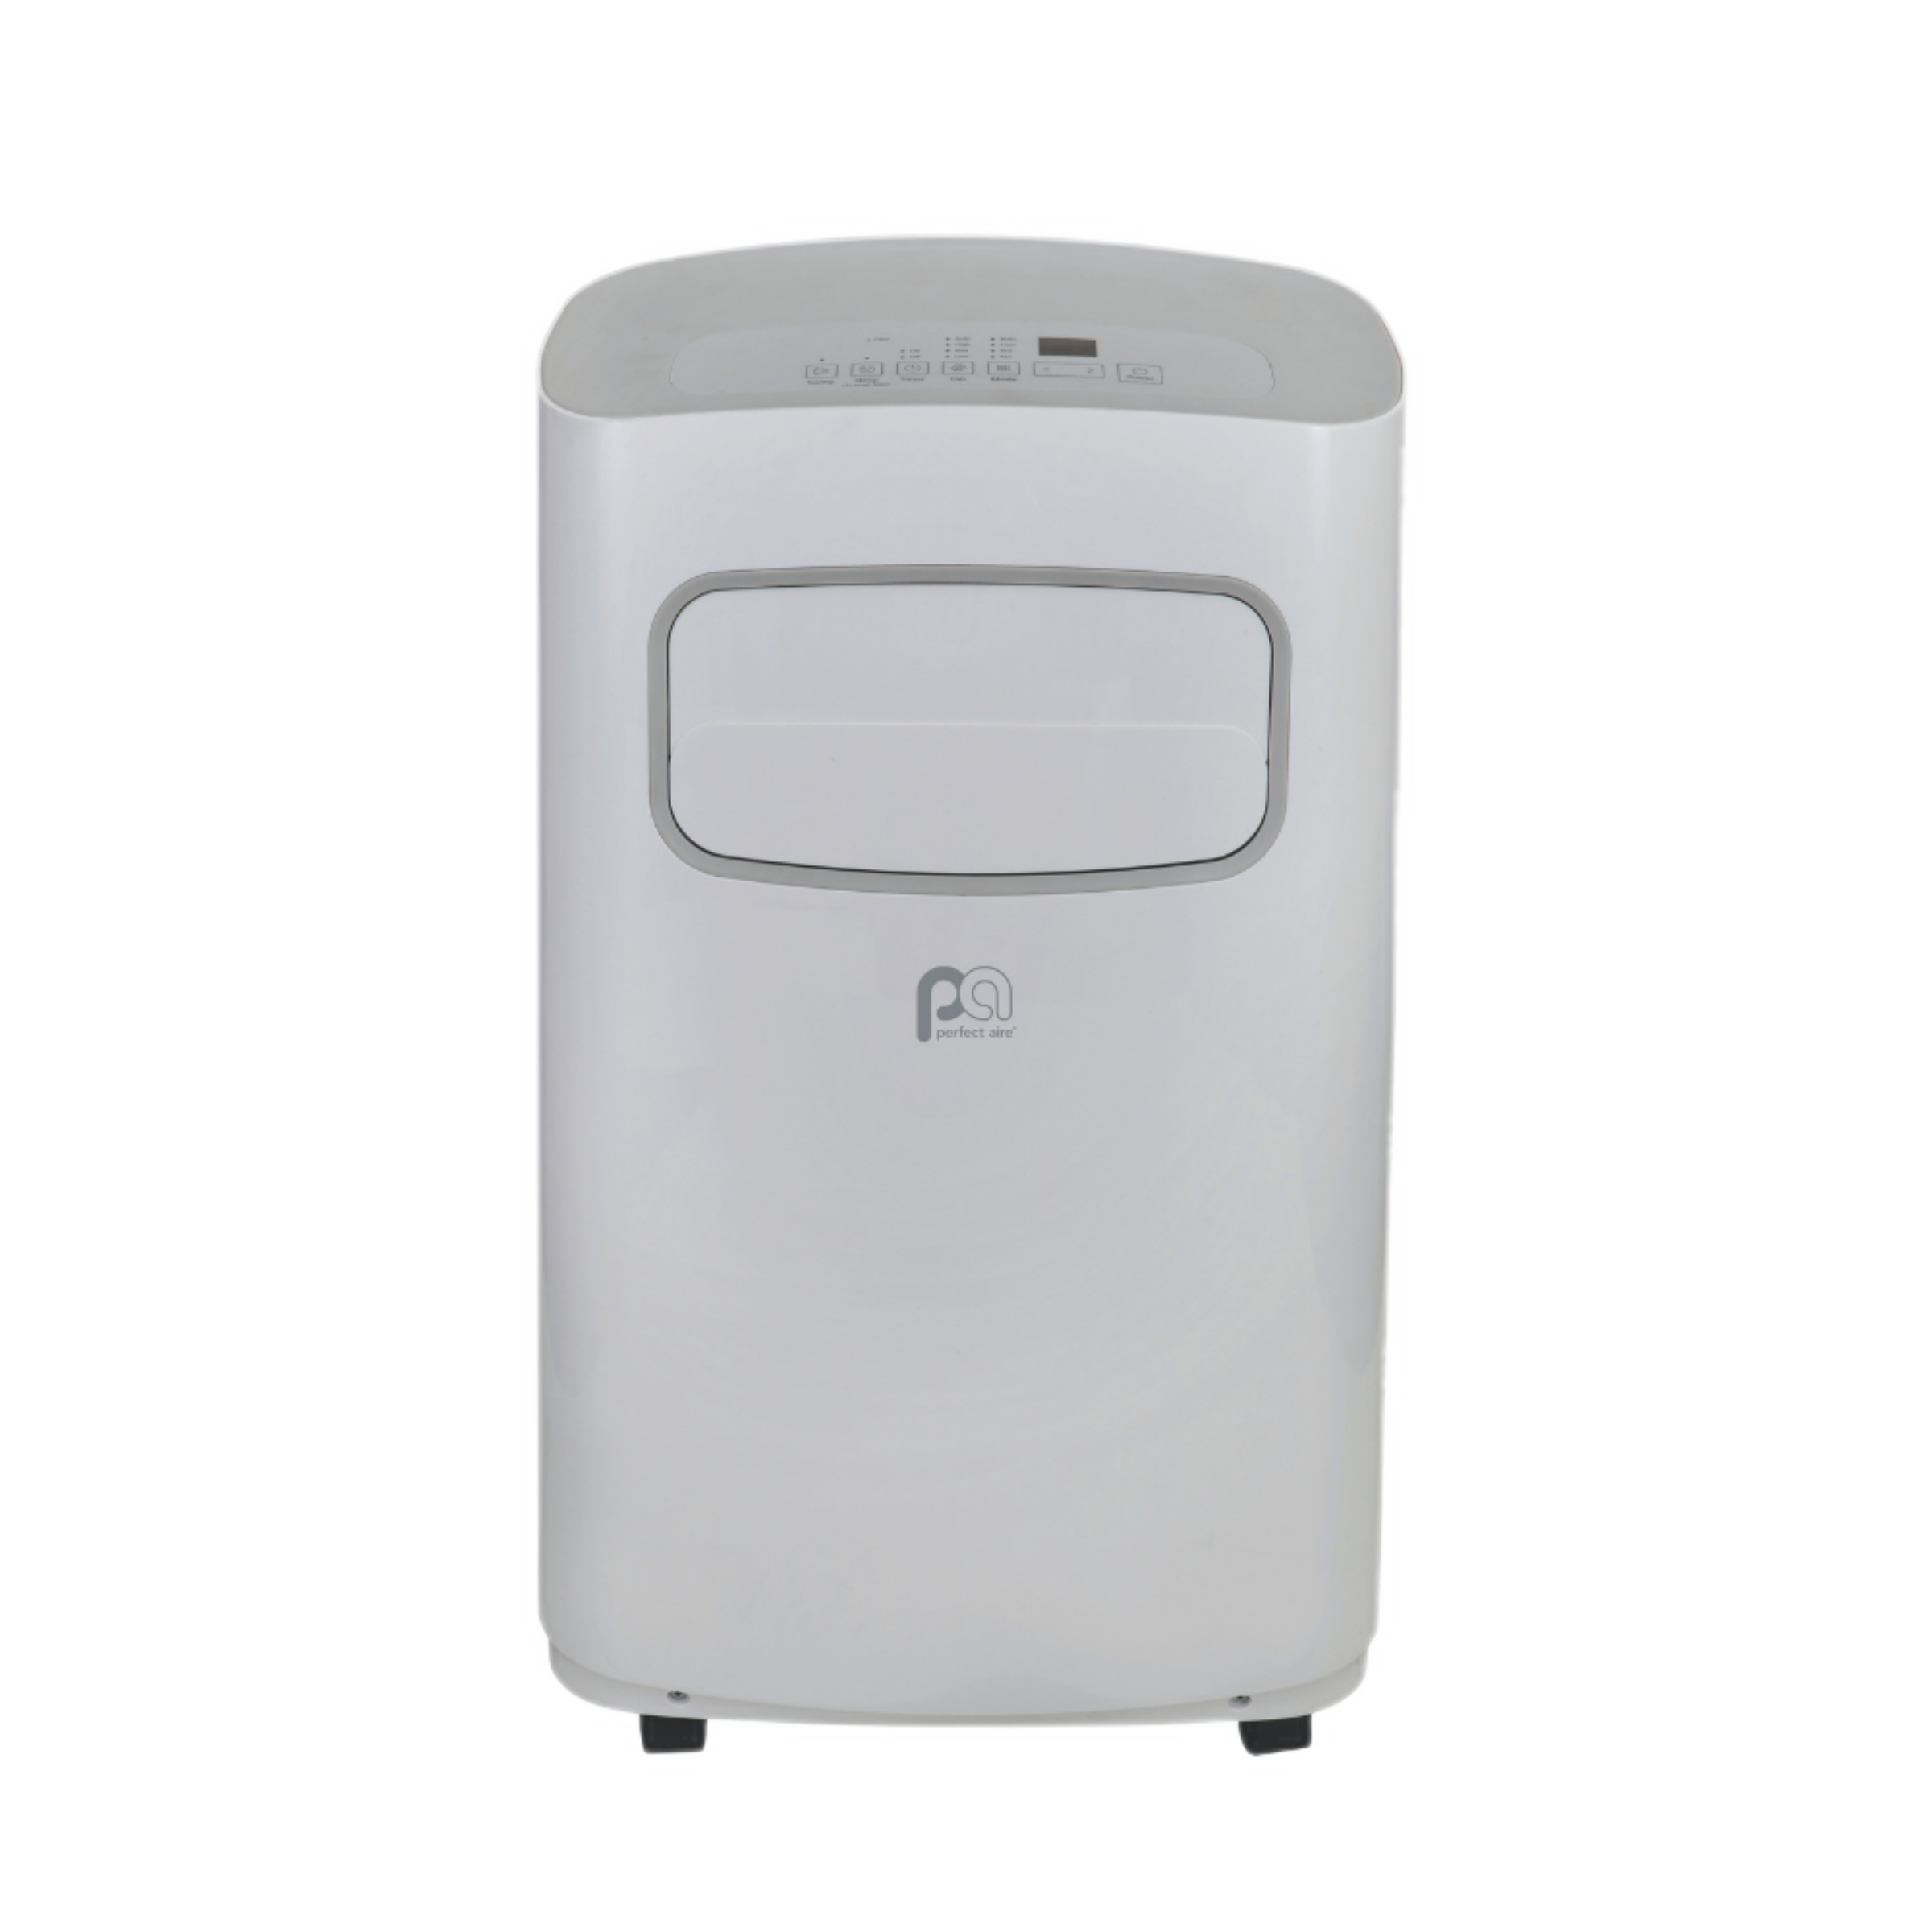 2PORT14000 Perfect Aire 14,000 BTU Compact Portable Air Conditioner - CEC, Sq. ft: 550-700 Coverage, With Remote Control, Non-Ozone Depleting R32 Refrigerant, EER = 7.3